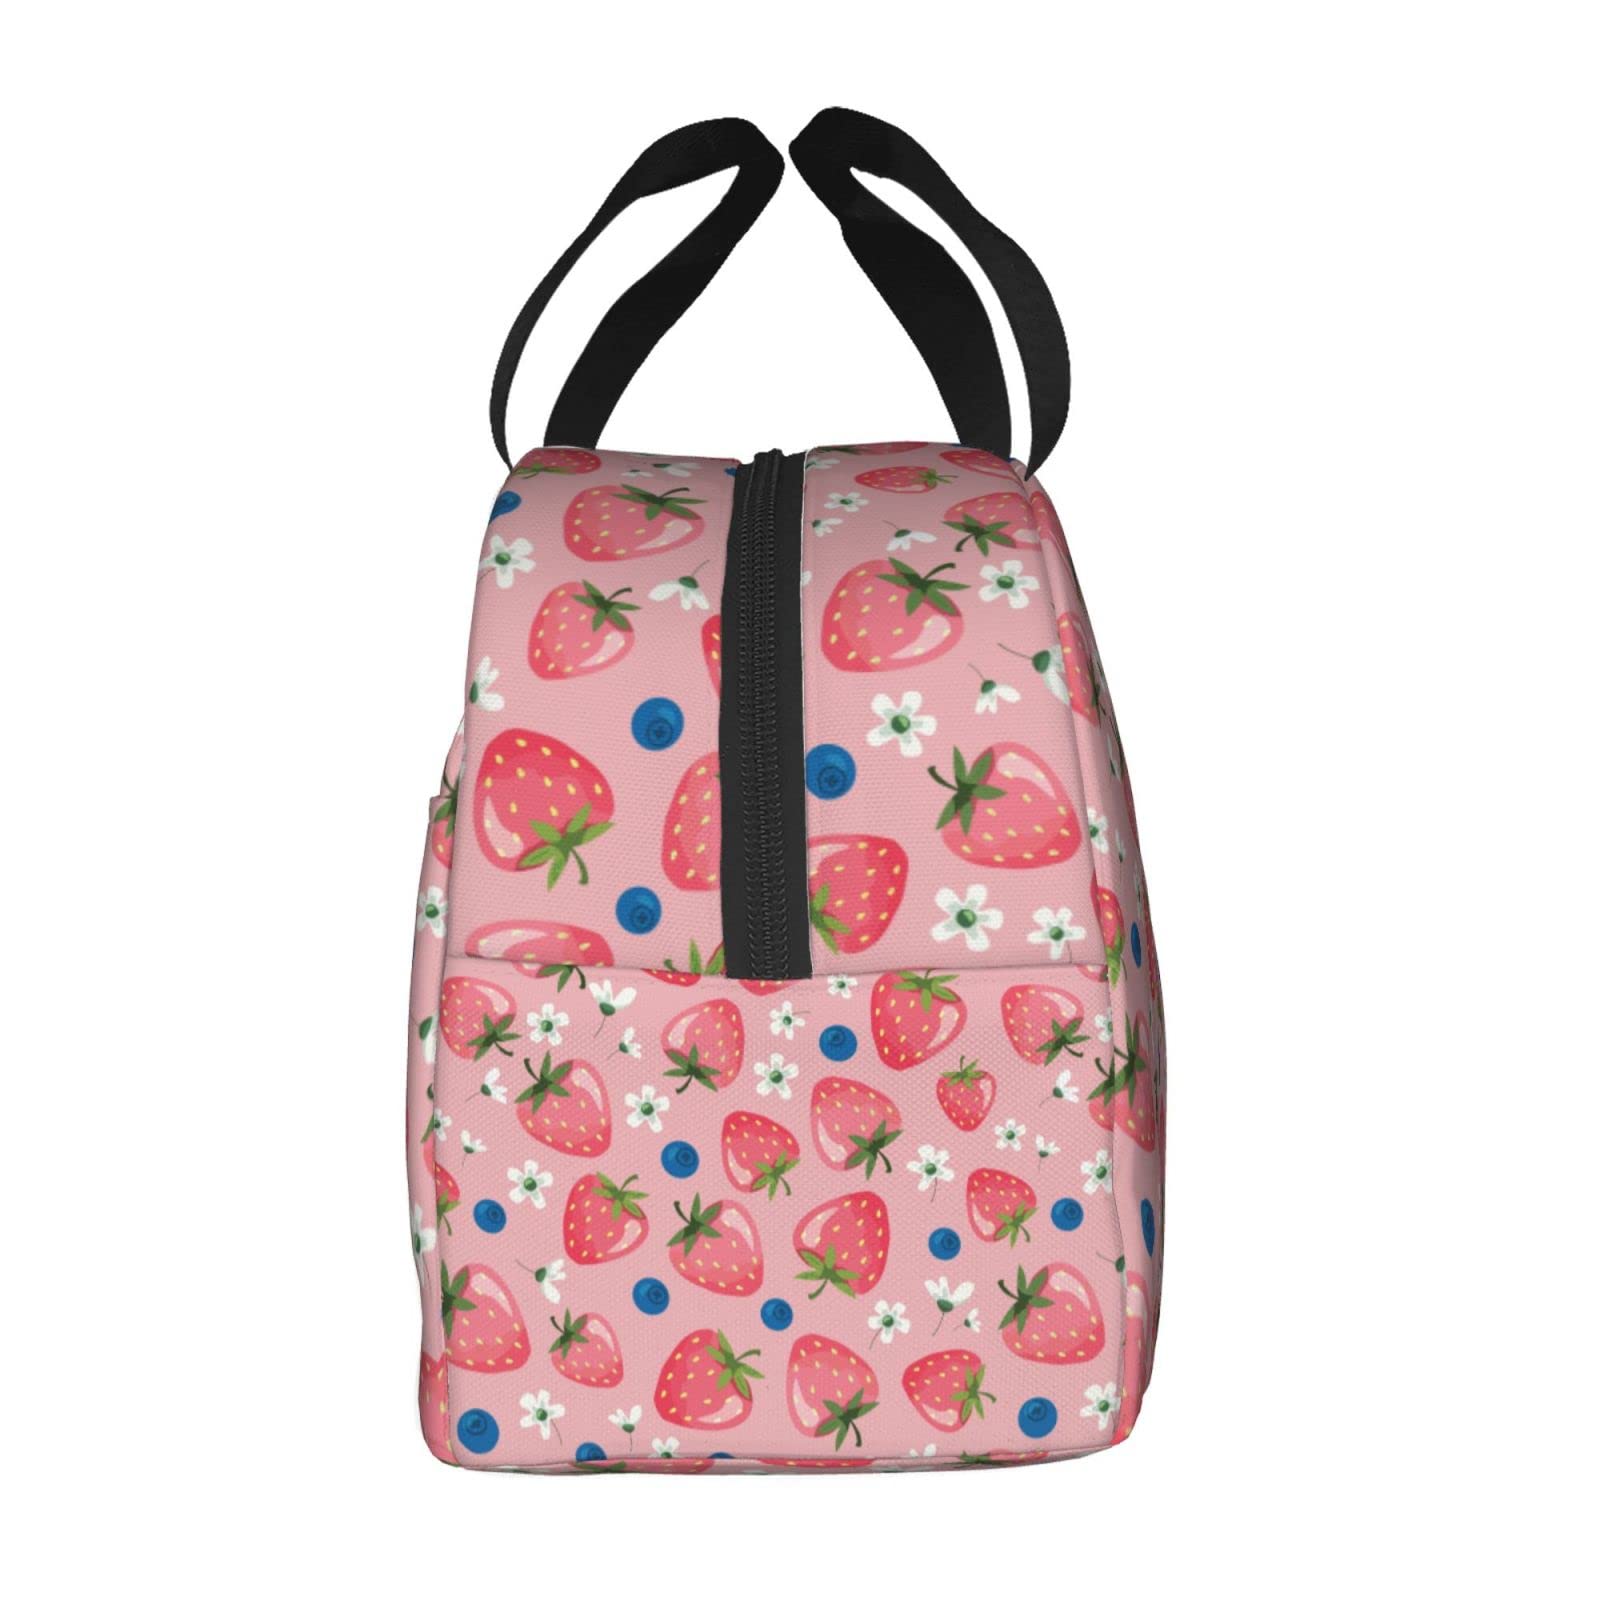 Cute Strawberry Blueberry Reusable Insulated Lunch Bag For Women Men Waterproof Tote Lunch Box Thermal Cooler Lunch Tote Bag For Work Office Travel Picnic